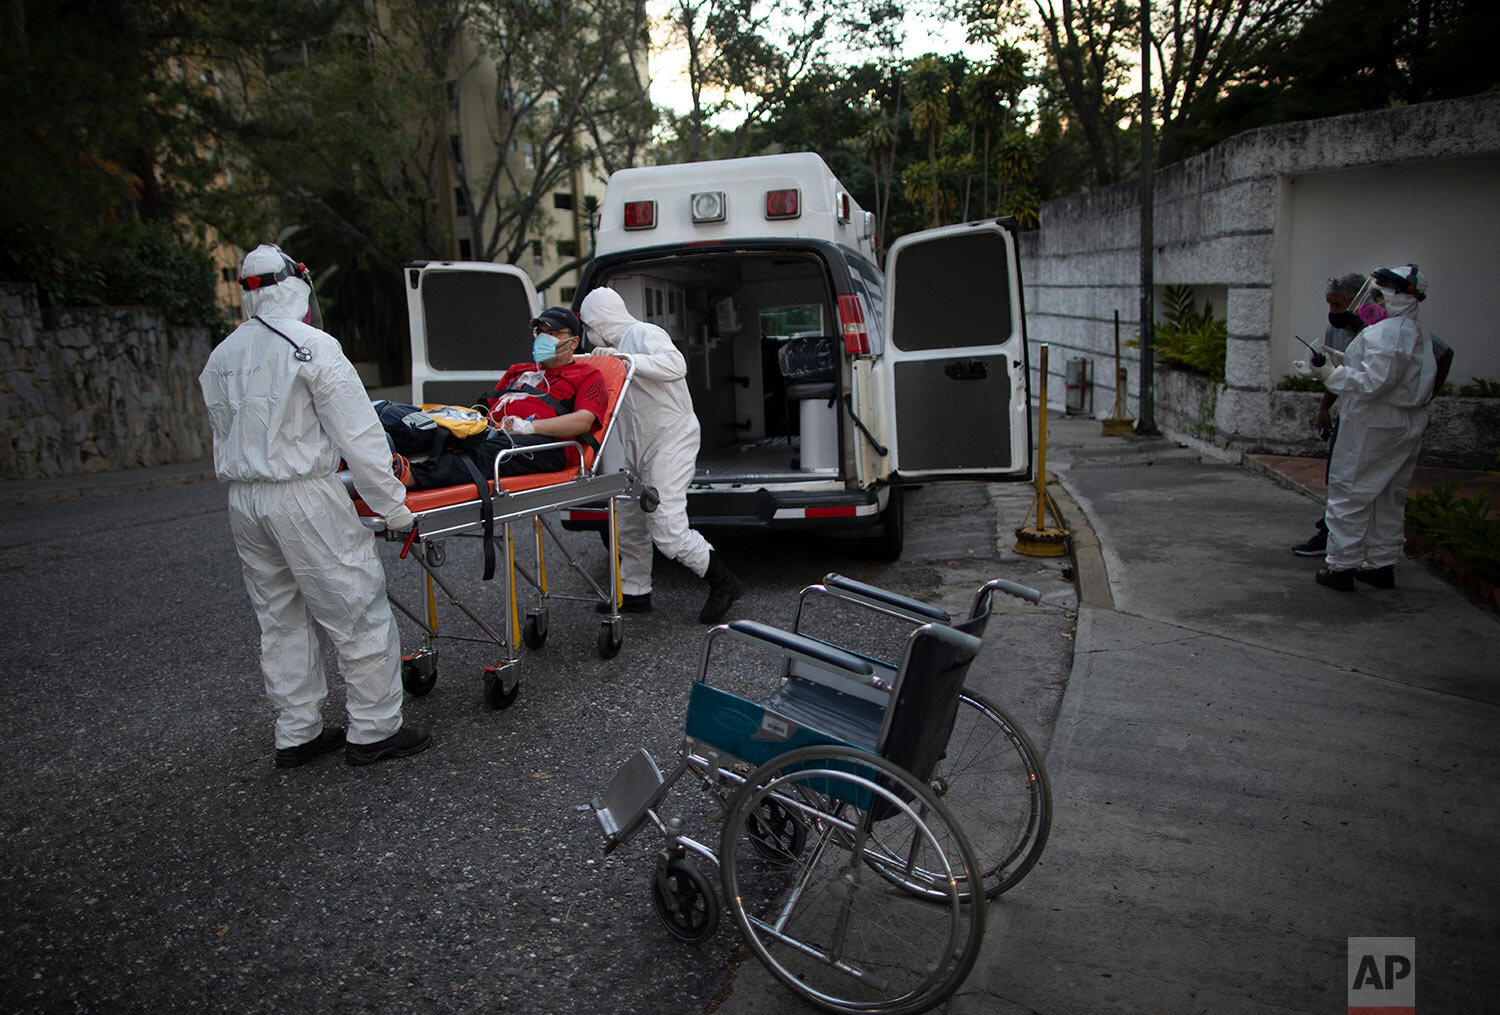  Angels of the Road volunteer paramedics transfer a person suspected of having COVID-19 into their one ambulance, in Caracas, Venezuela, Thursday, Feb. 11, 2021. (AP Photo/Ariana Cubillos) 